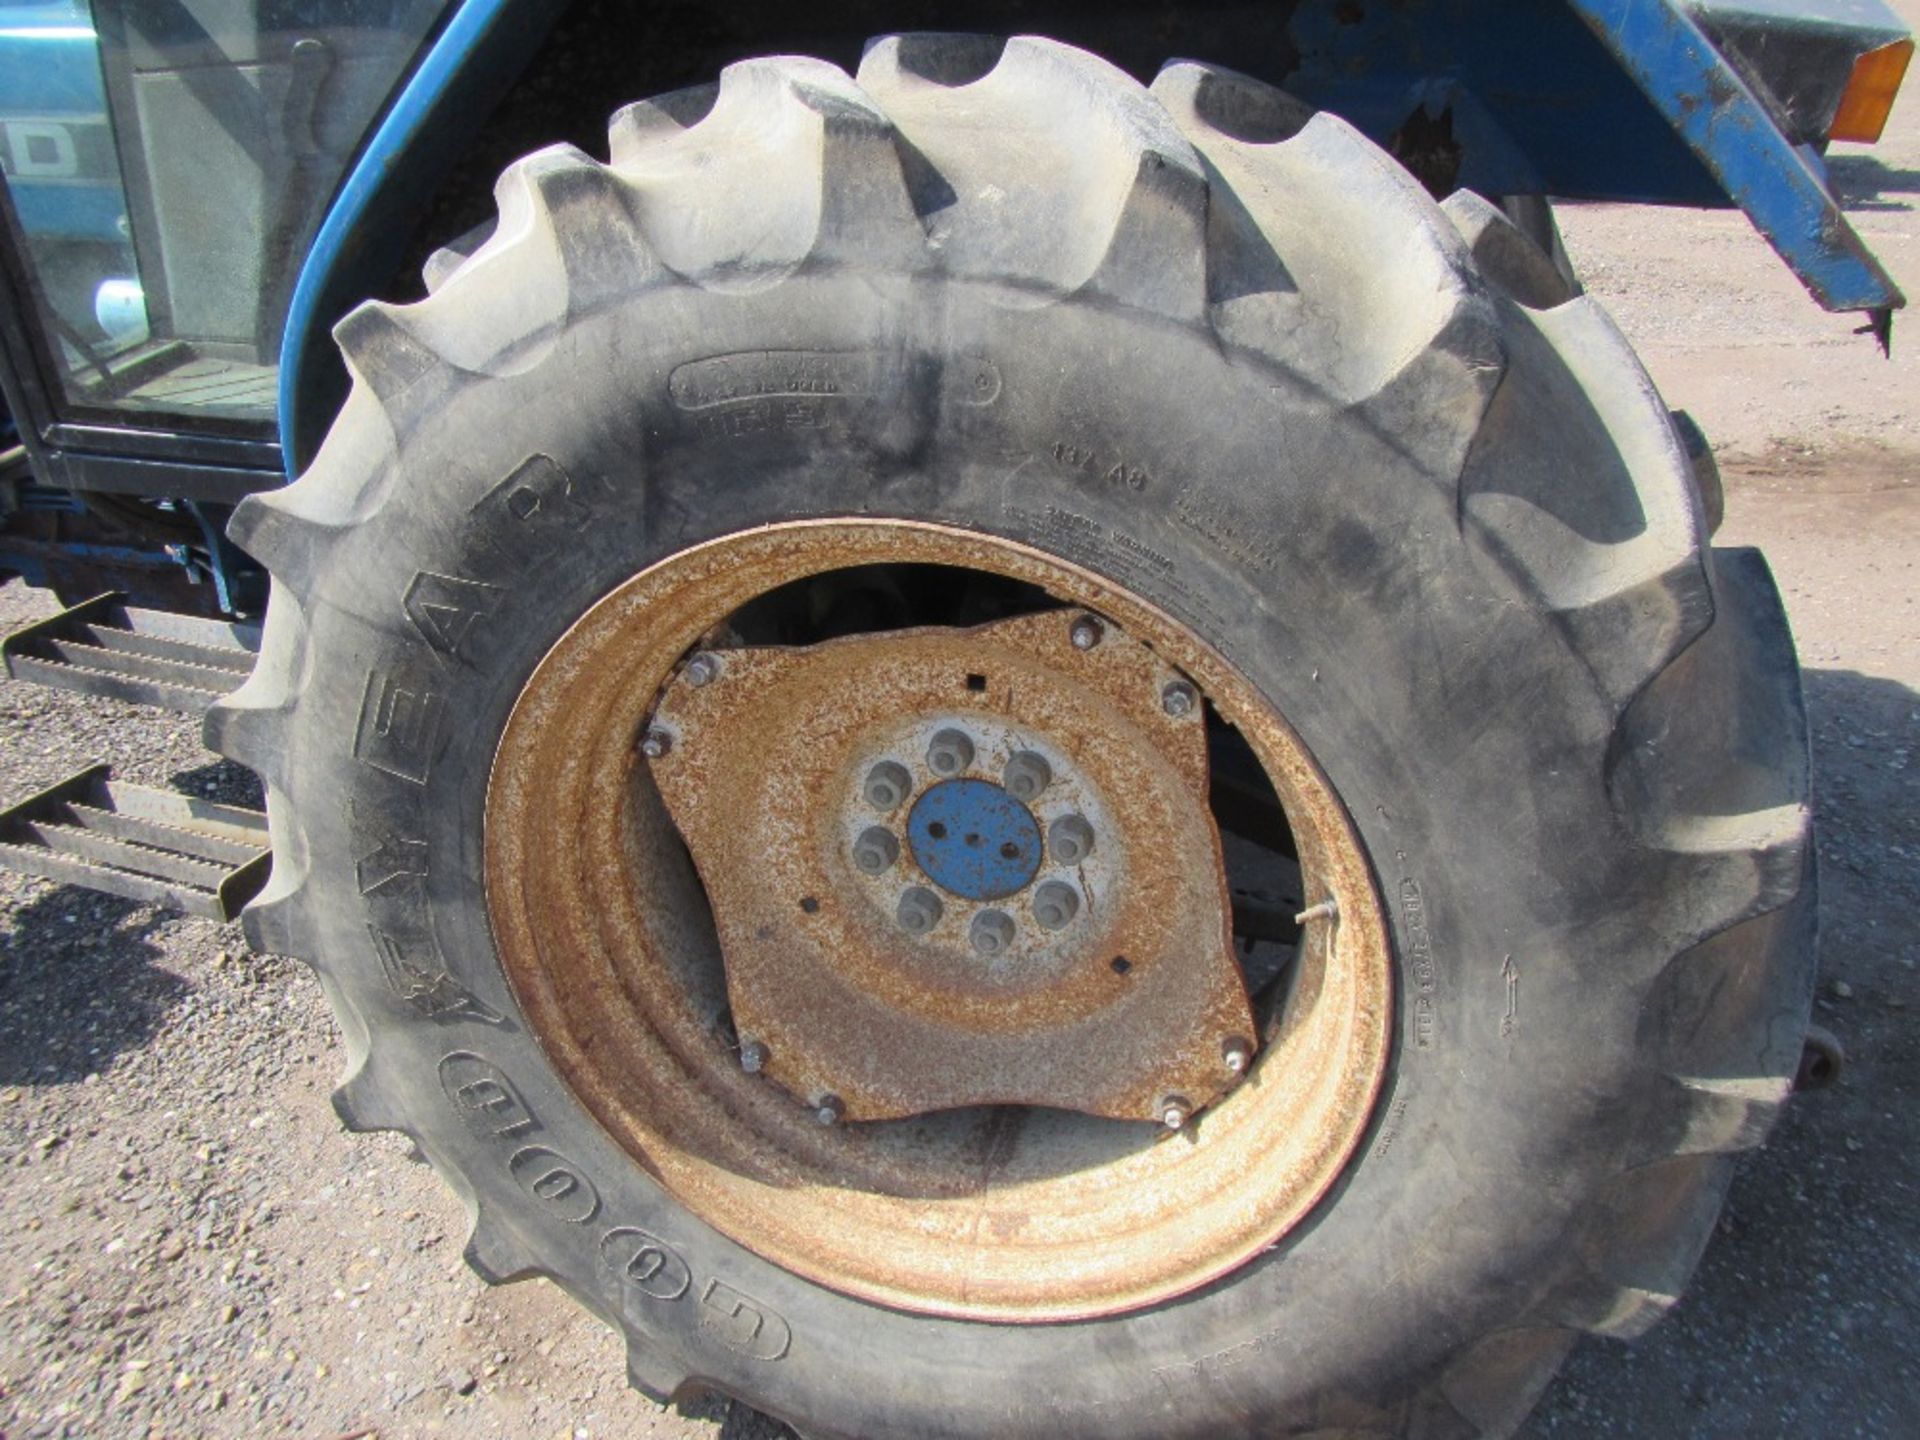 Ford 5030 Tractor with 3 Point Linkage and Auto Hitch. New clutch recently fitted. Reg. No. M955 BNH - Image 10 of 17